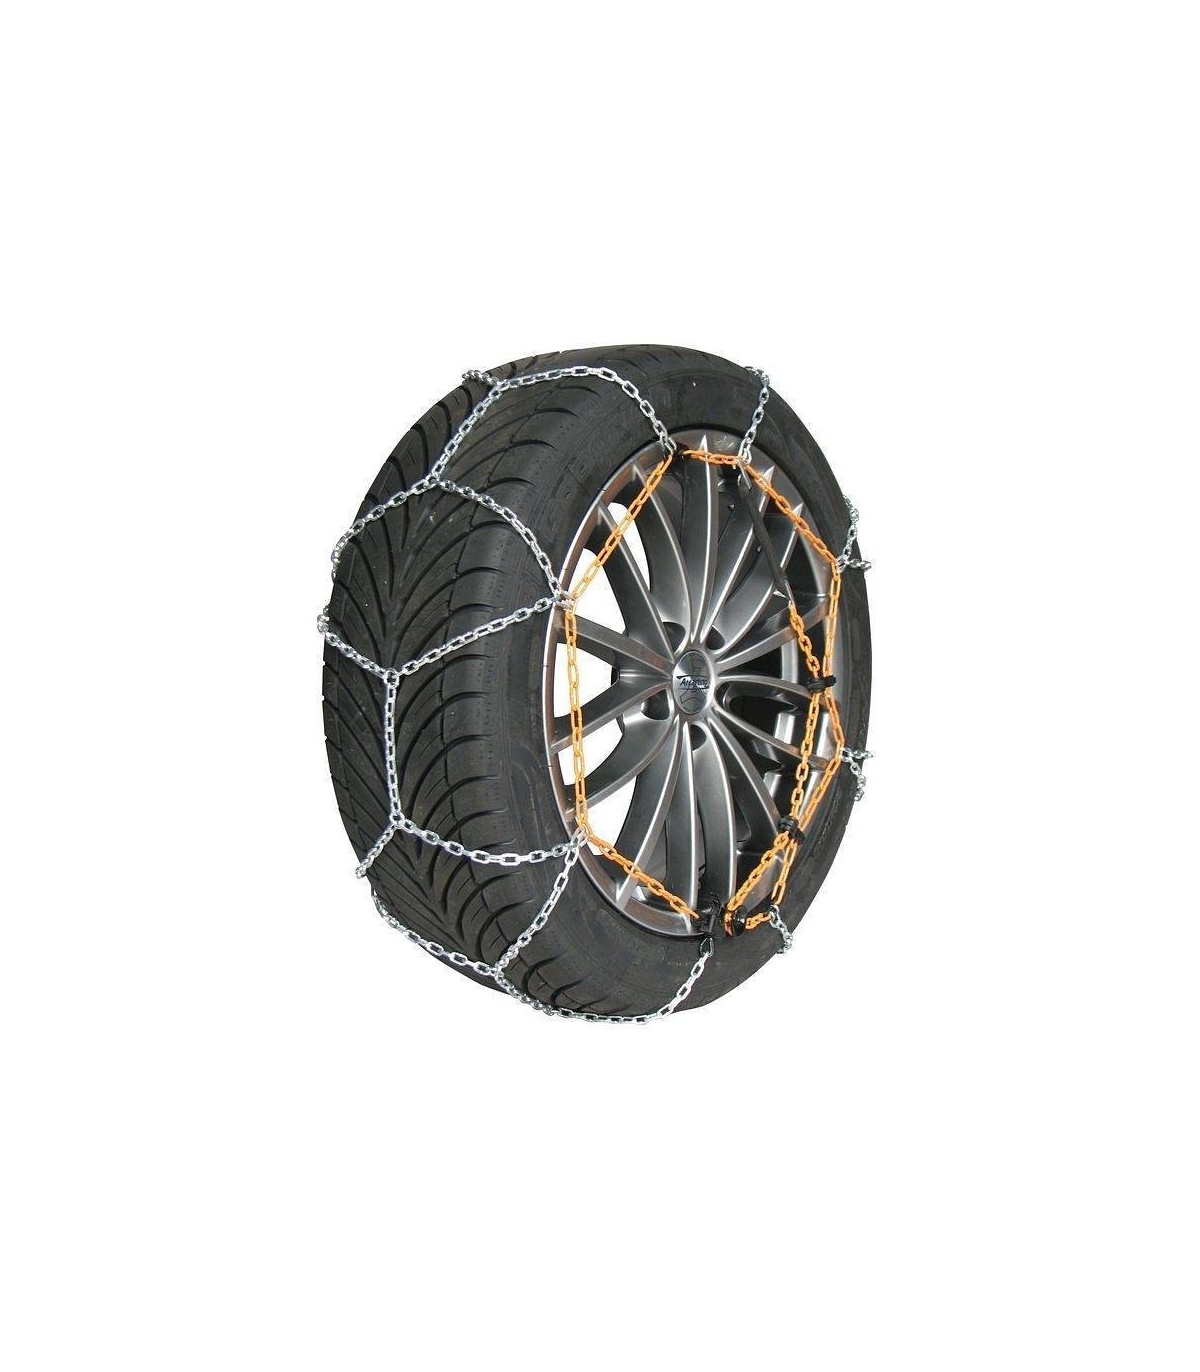 Chaines neige manuelle 9mm 185/65 R16 - 185 65 16 - 185 65 R16